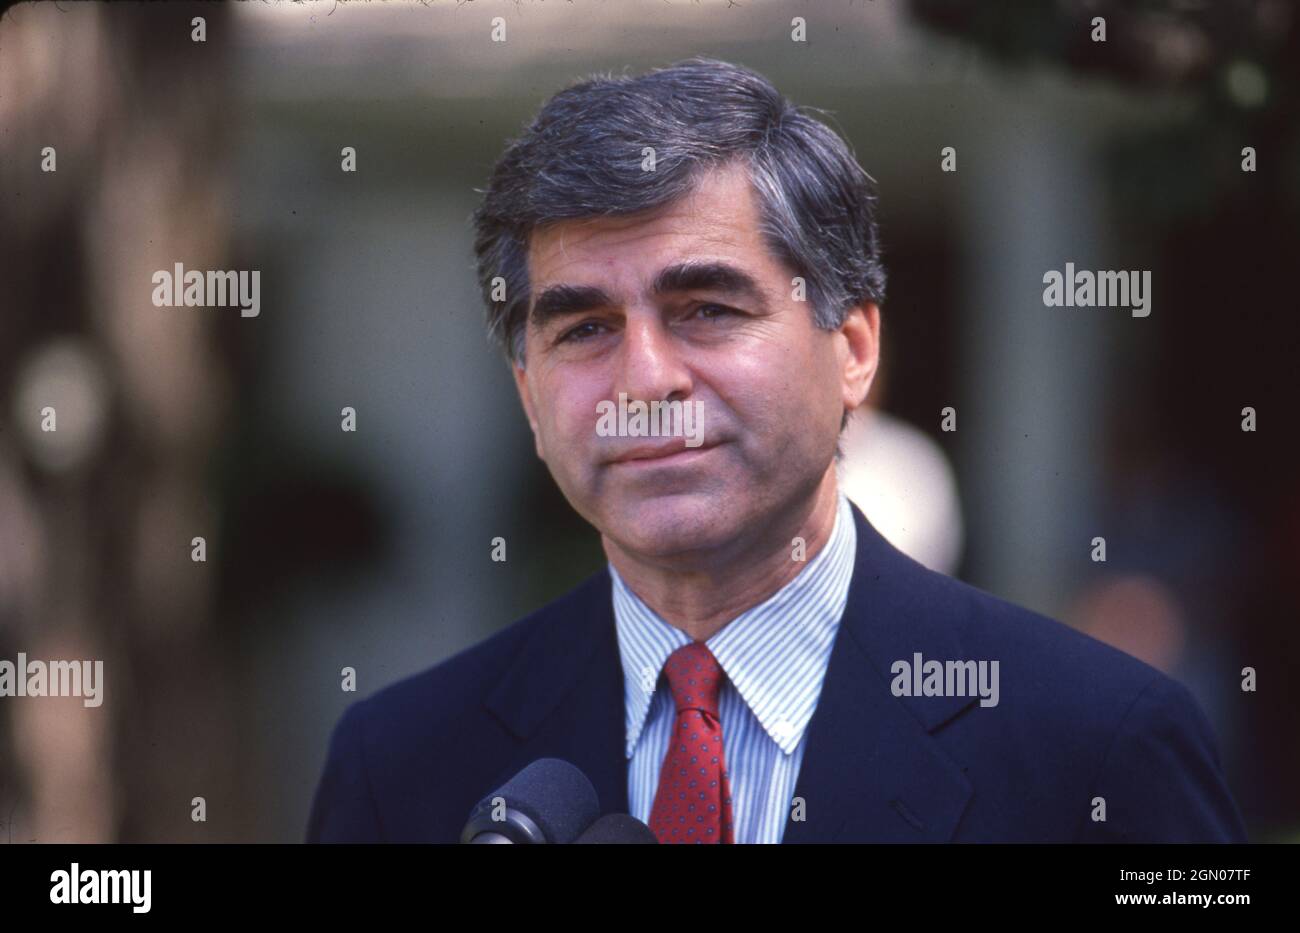 Austin Texas USA, 1988: Democratic presidential candidate and former Massachusetts governor Michael Dukakis campaigning at the LBJ Library  prior to the November presidential election. ©Bob Daemmrich Stock Photo